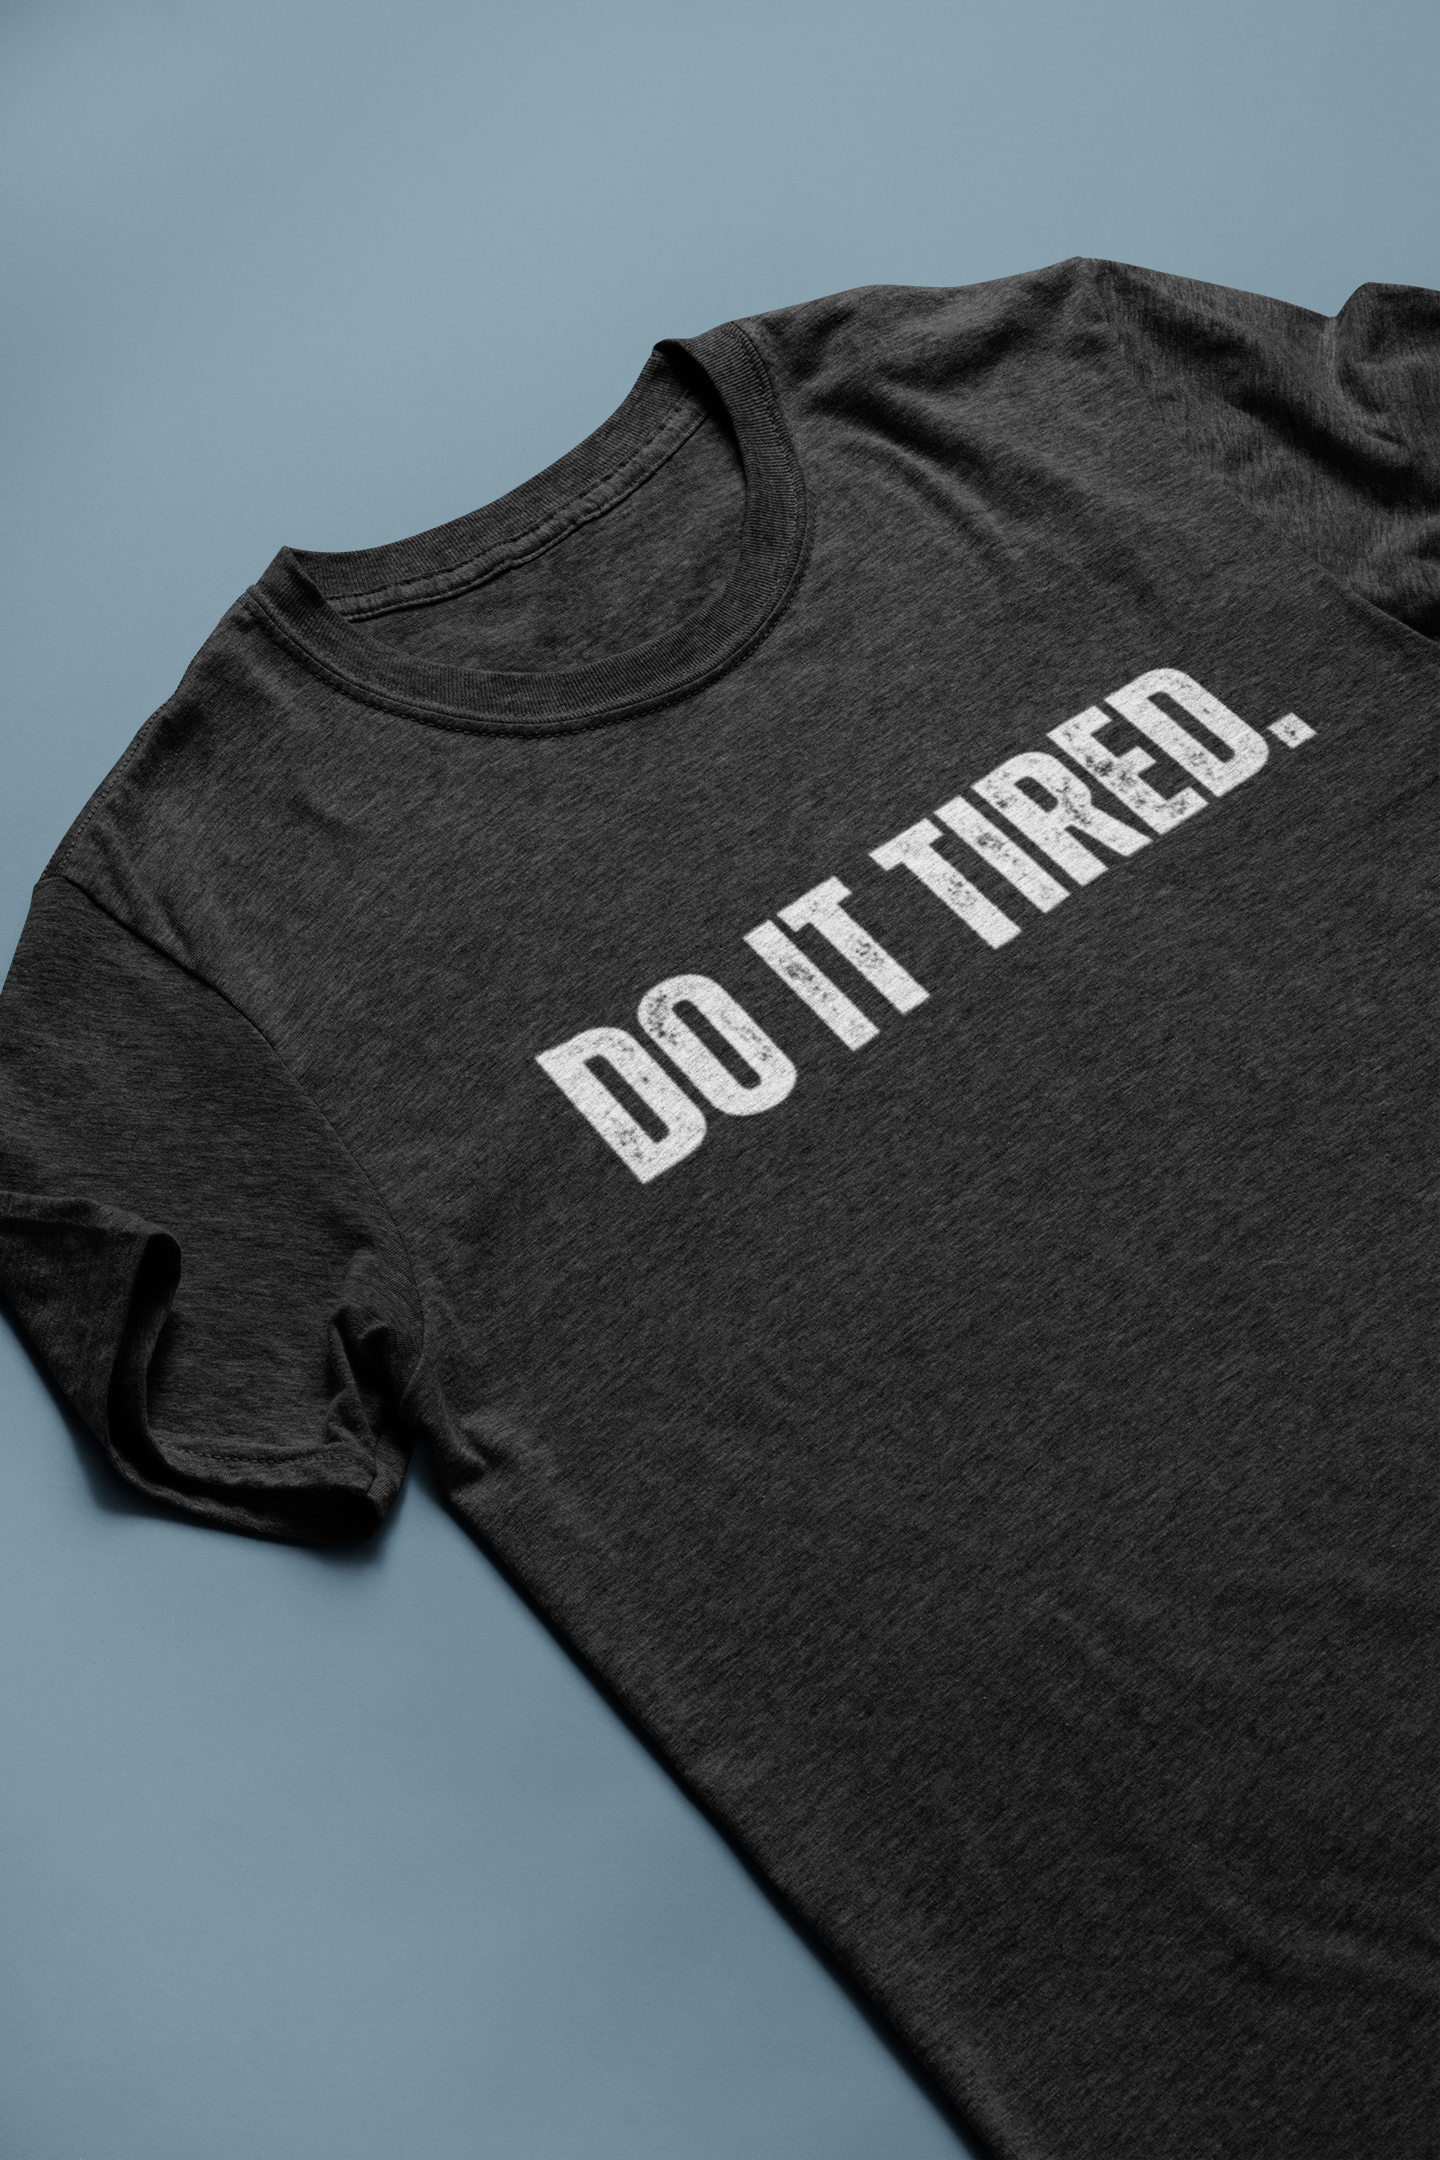 t shirt that says "do it tired"